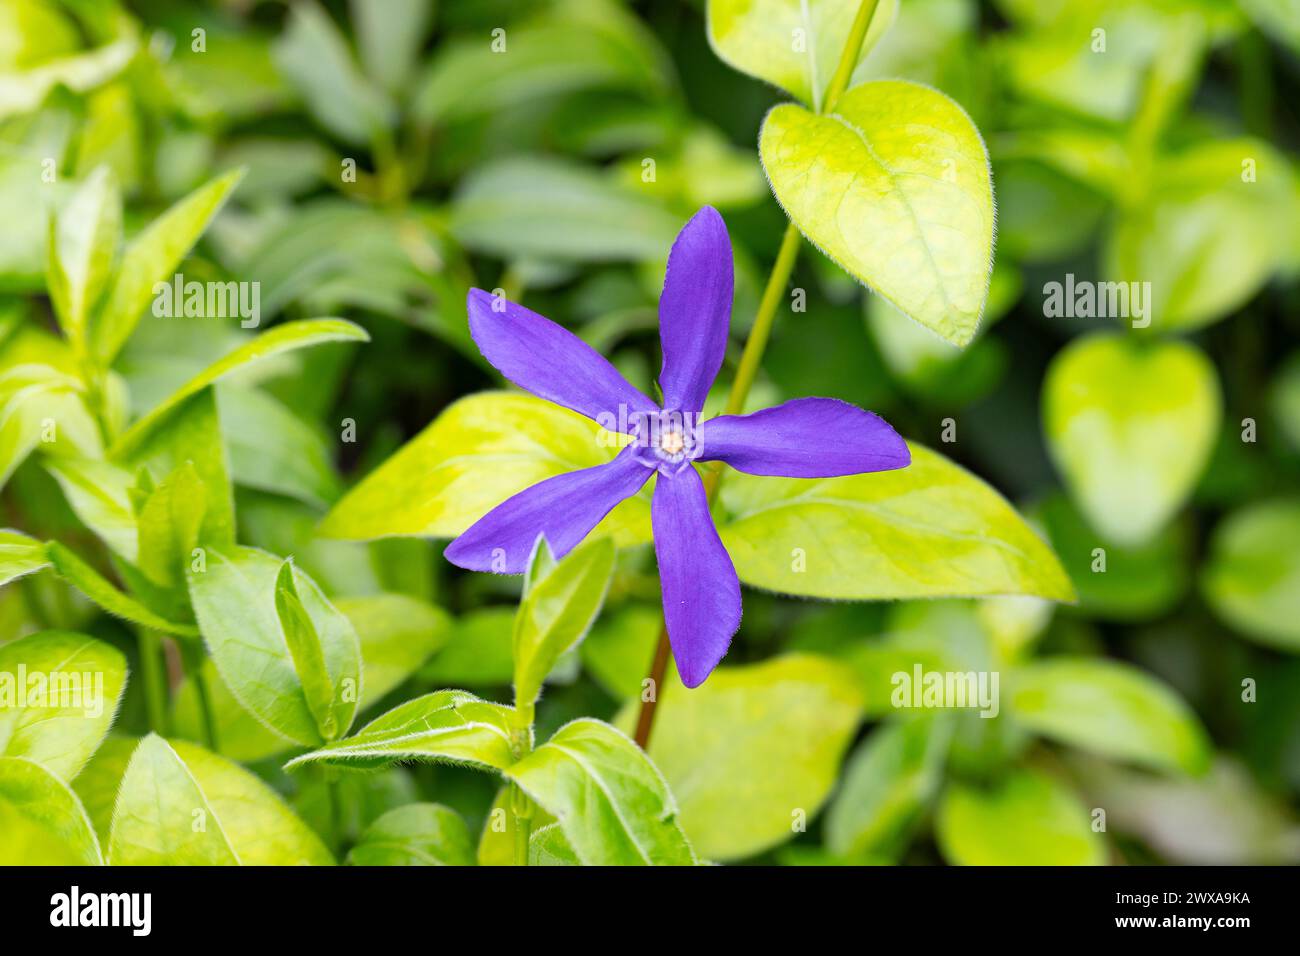 Vinca major, with the common names bigleaf periwinkle, large periwinkle, greater periwinkle and blue periwinkle, is a species of flowering plant in th Stock Photo